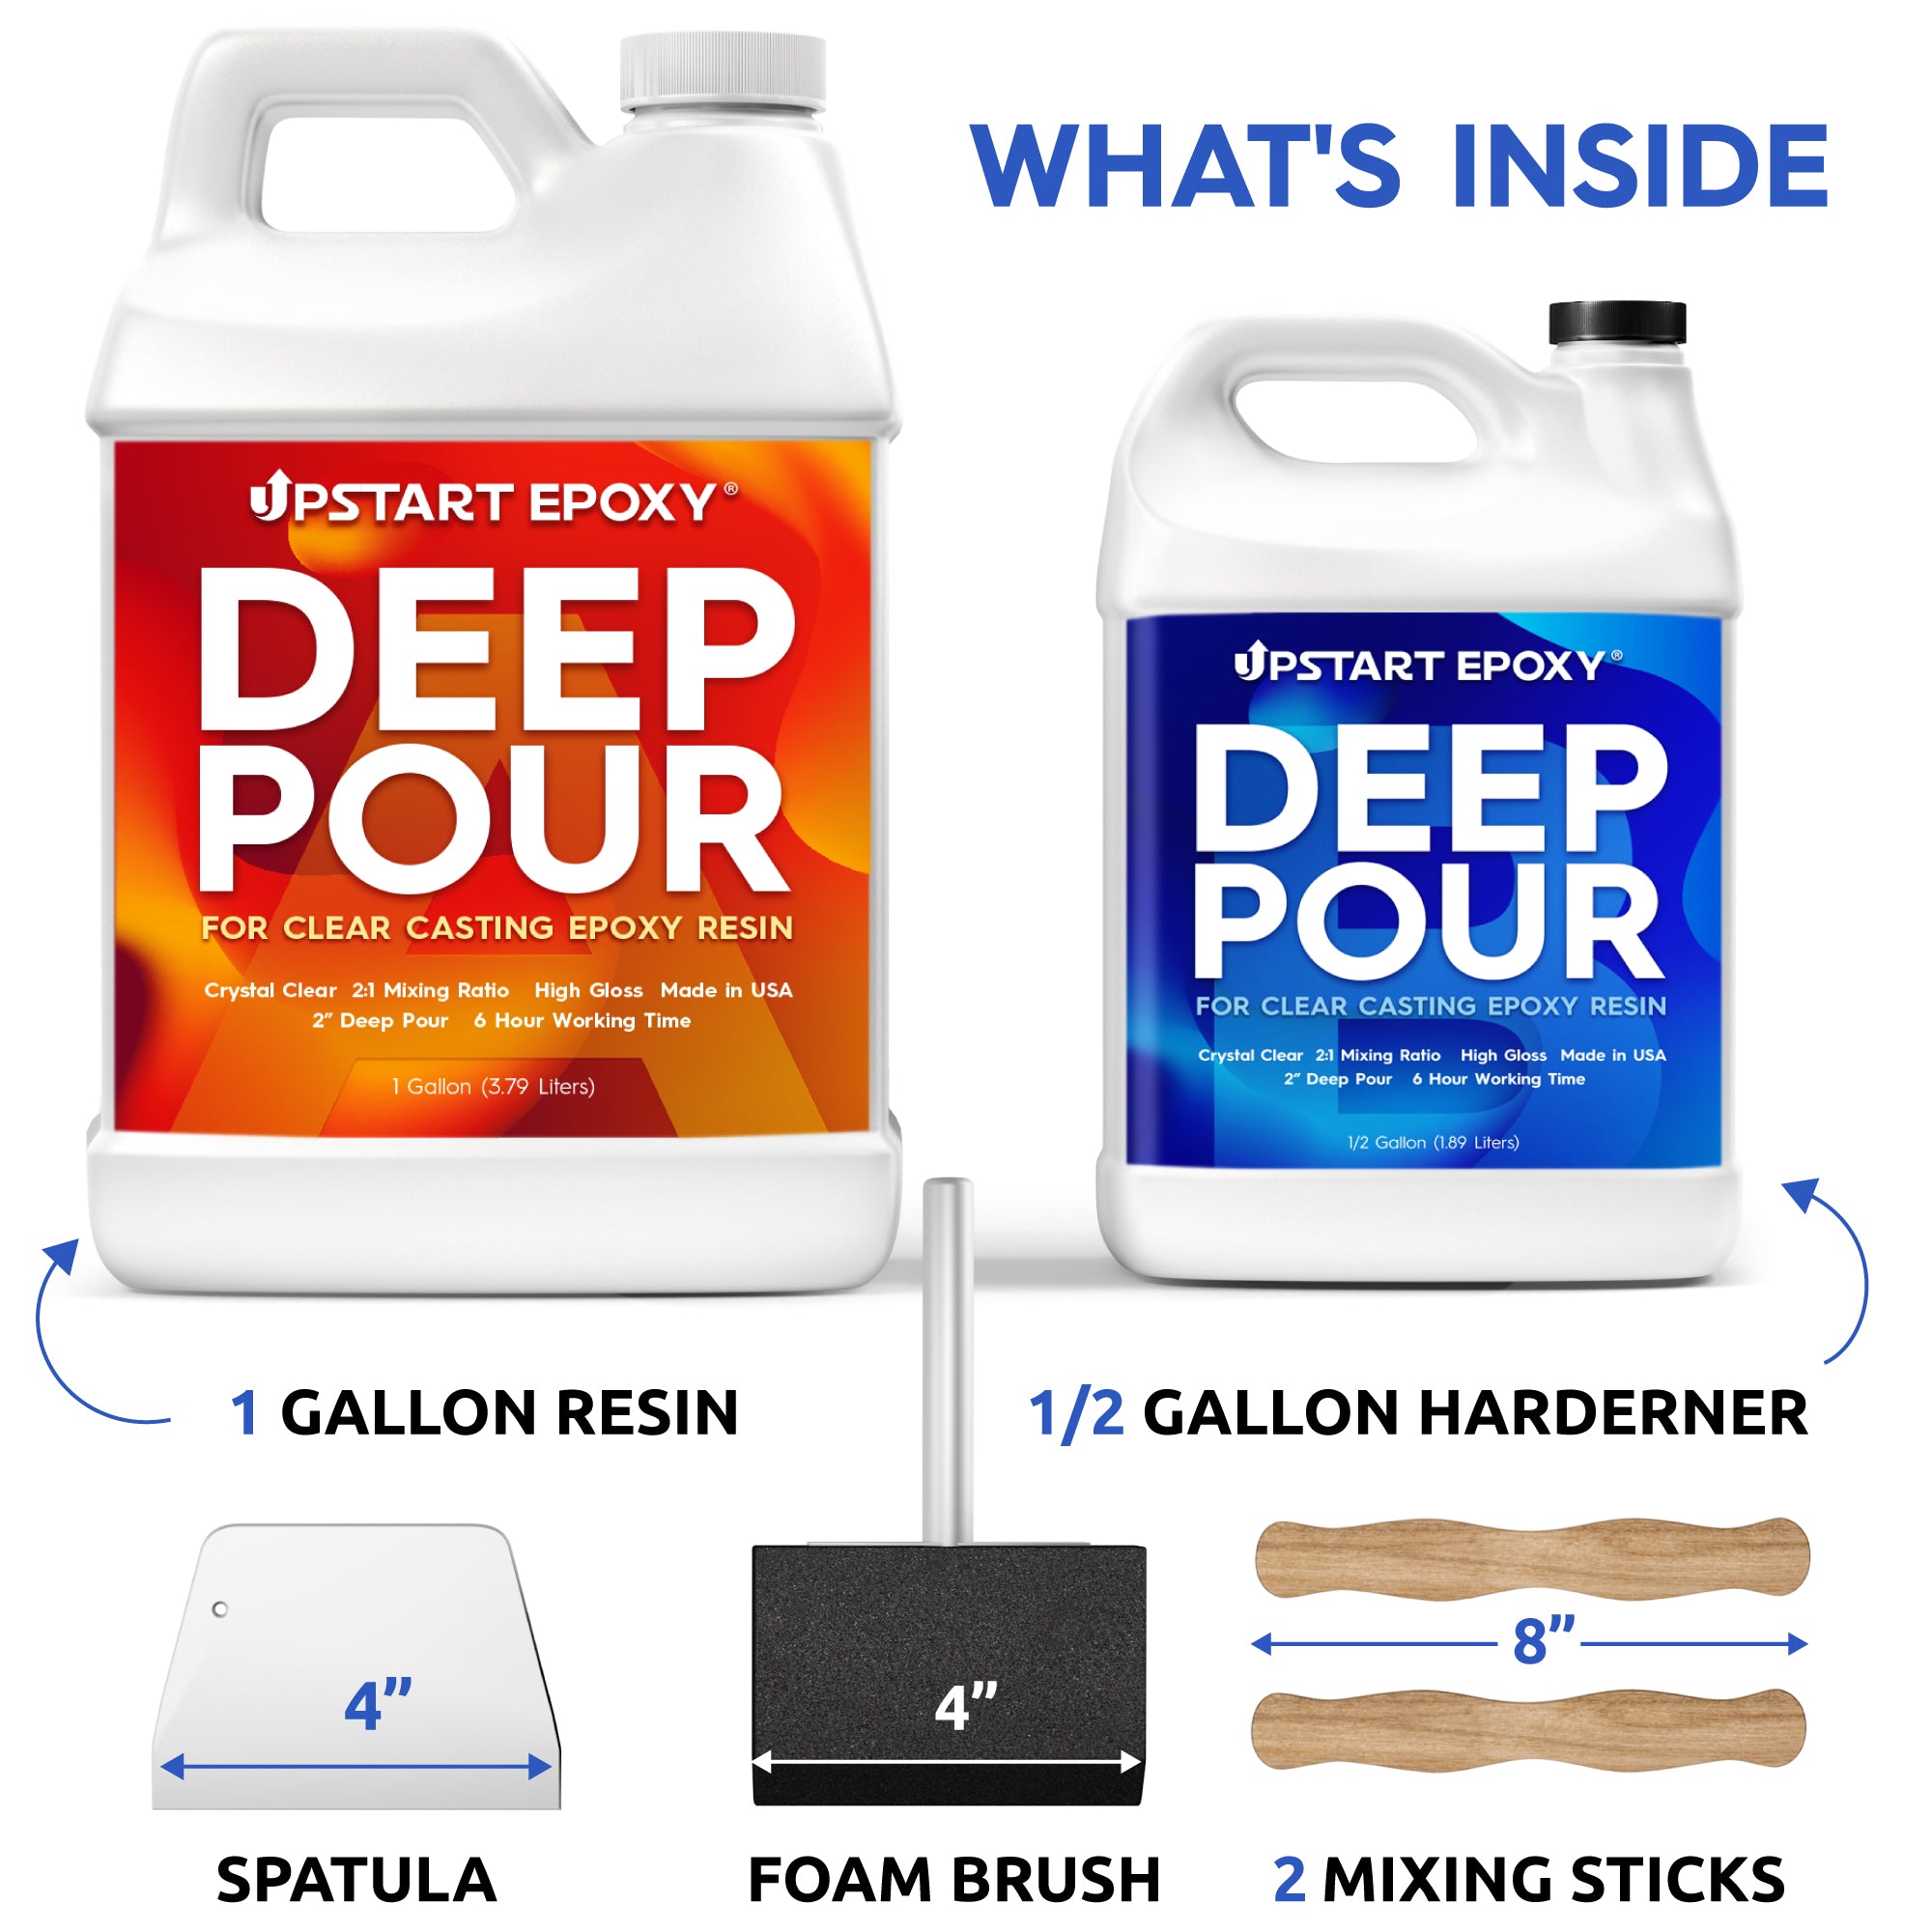 Upstart Epoxy: The #1 Epoxy Resin Made in the USA